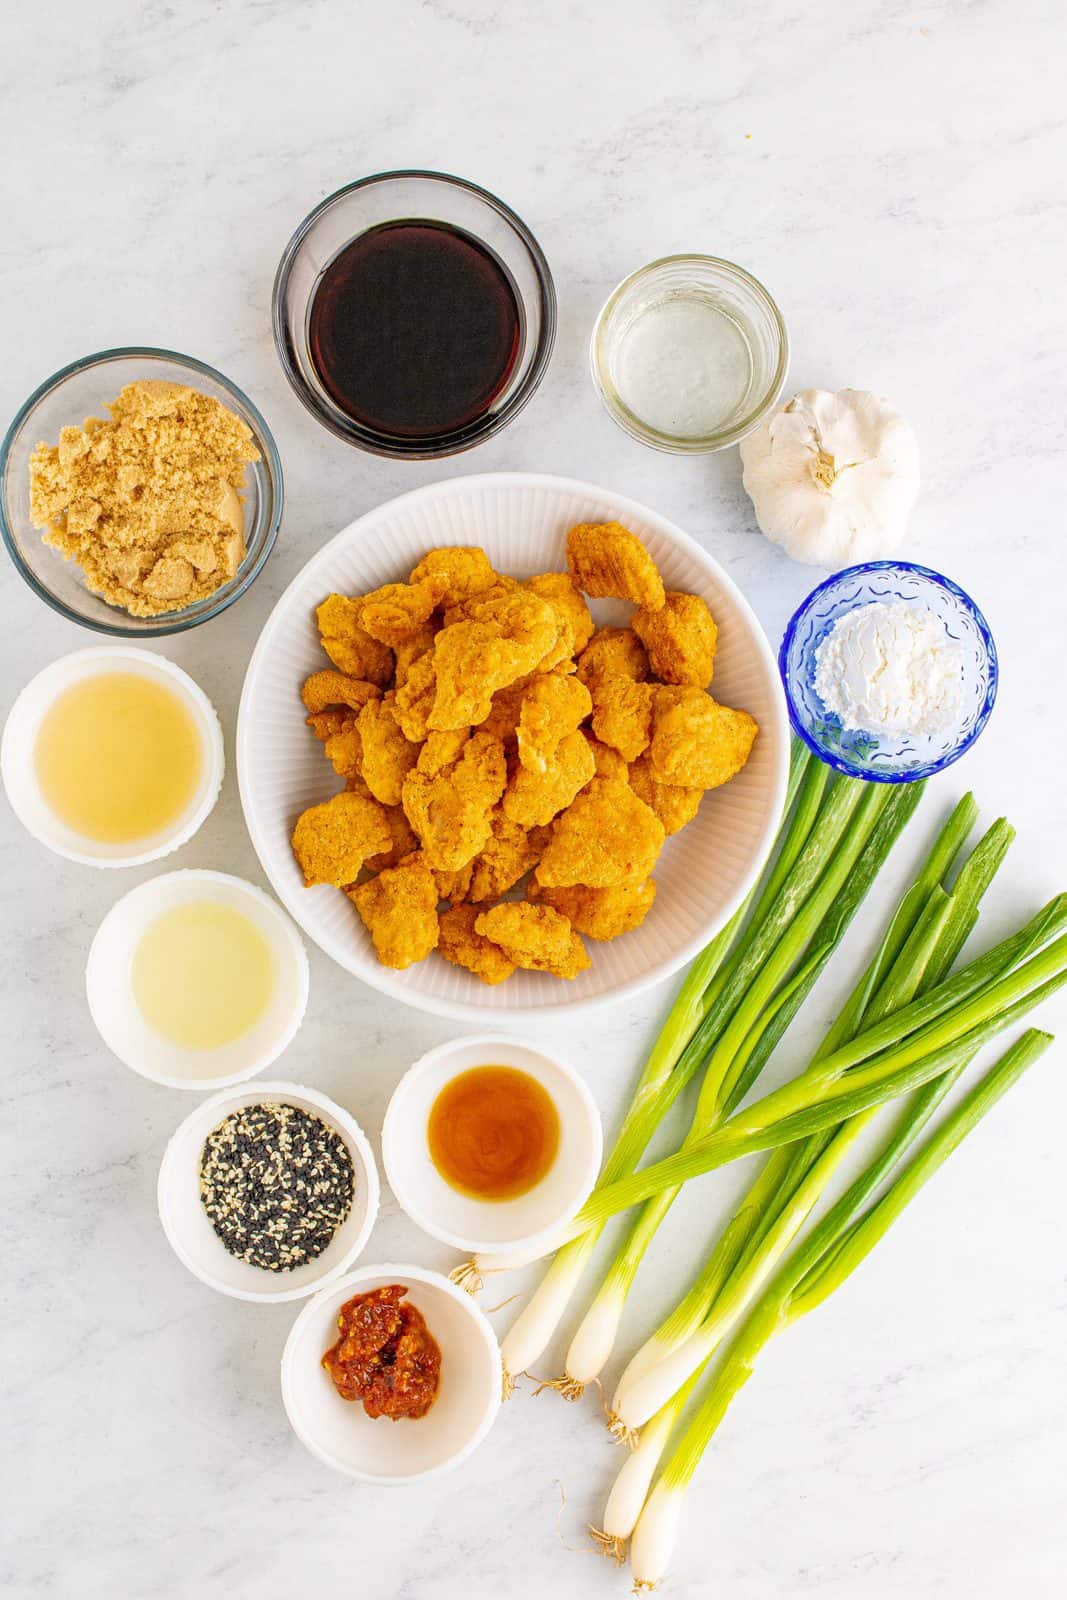 Ingredients needed: light brown sugar, rice wine vinegar, low sodium soy sauce, sesame oil, cooked popcorn chicken, water, cornstarch, vegetable oil, scallions, garlic, chili paste and sesame seeds.